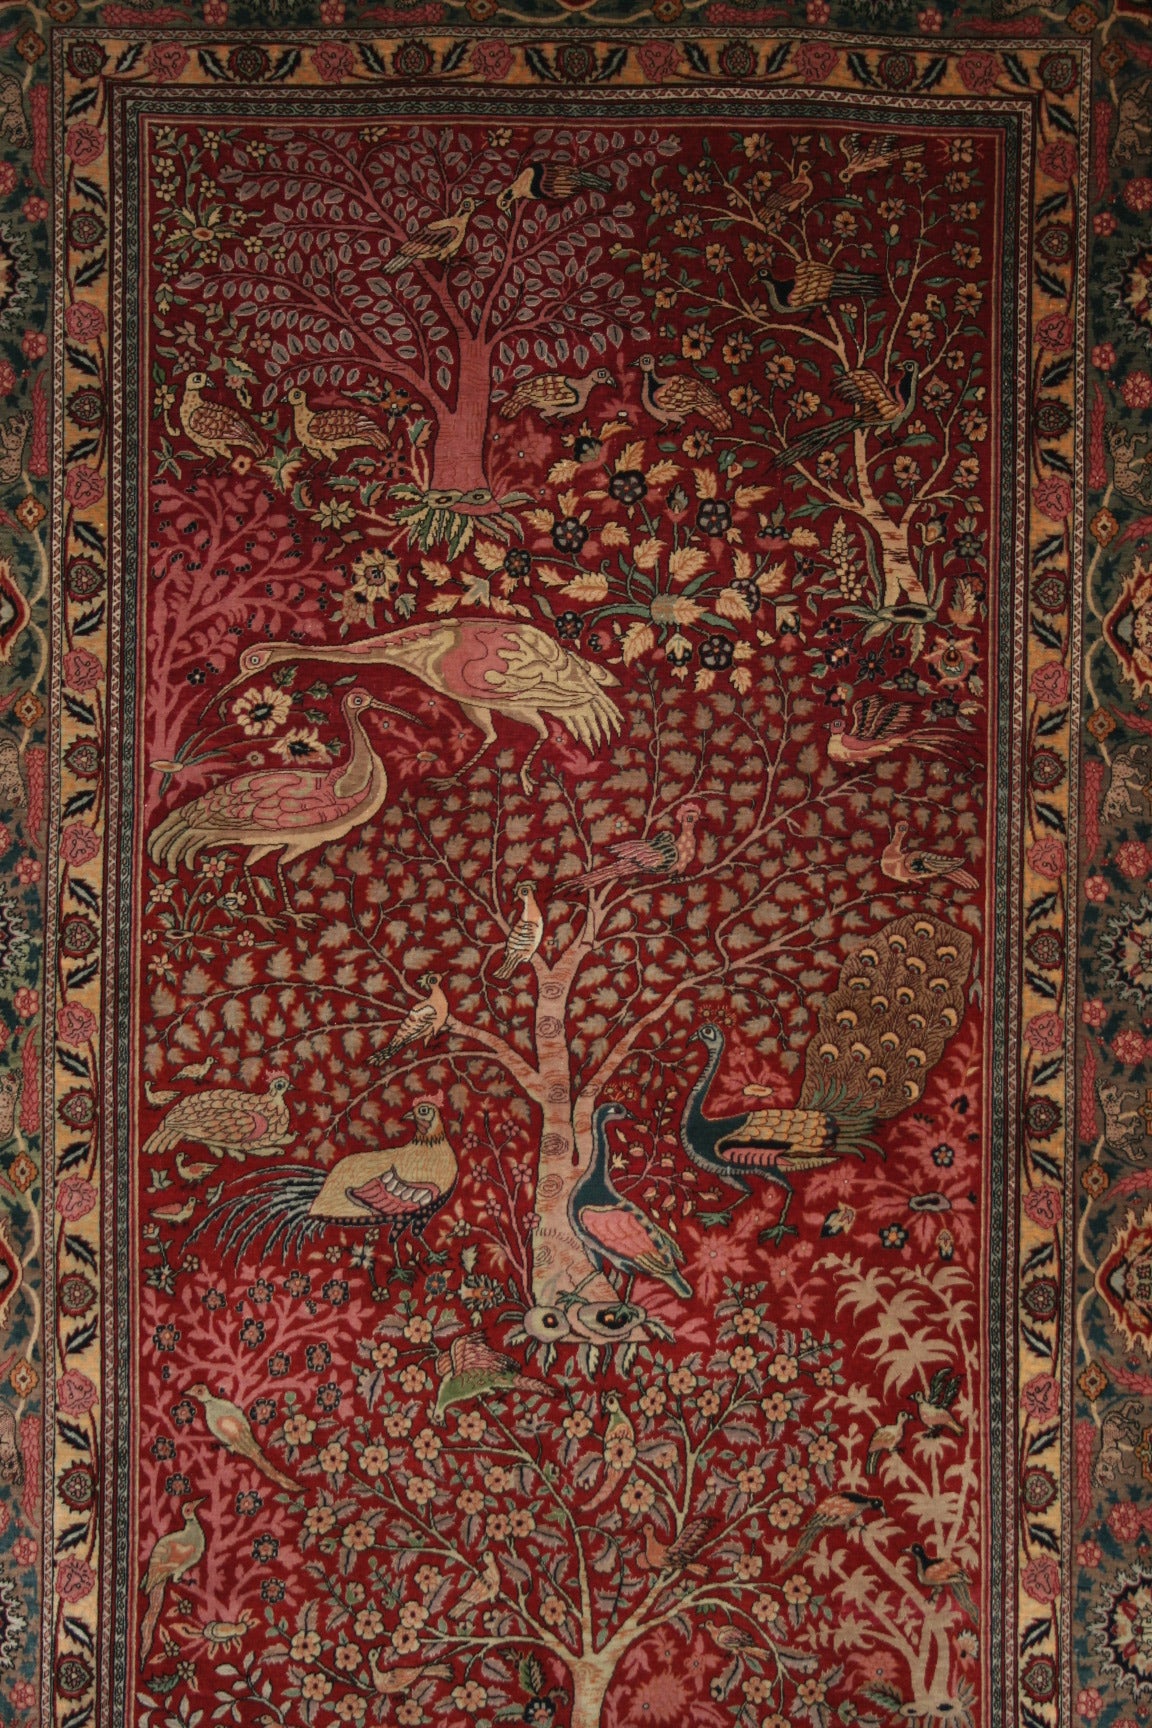 Very Rare Antique Pictorial Indian Mughal Carpet In Excellent Condition For Sale In Aspen, CO